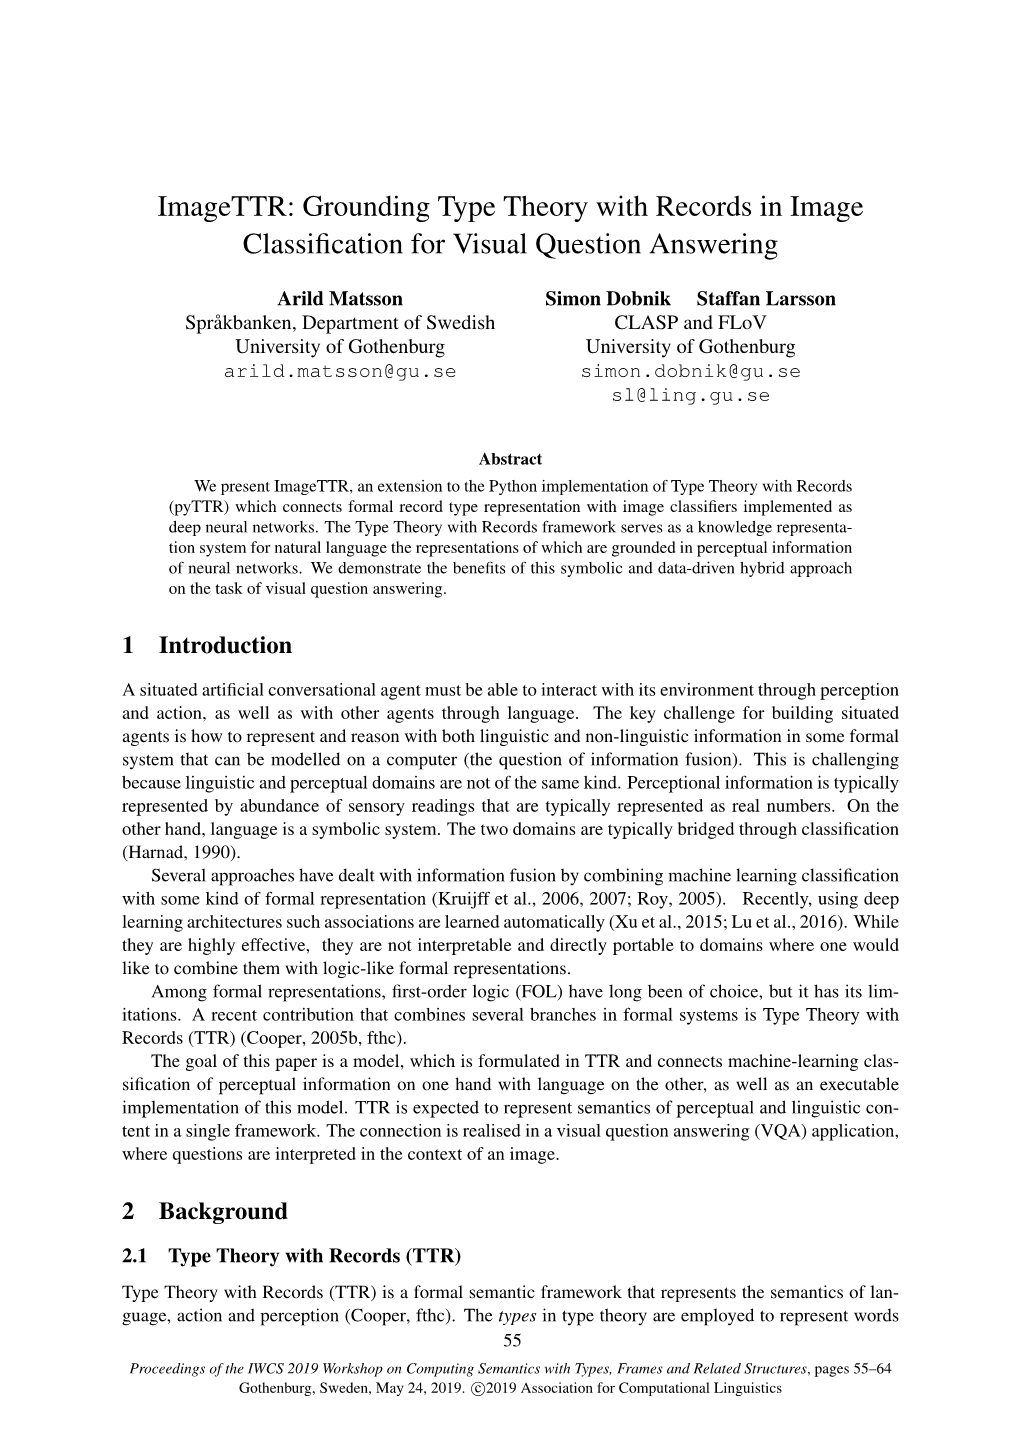 Grounding Type Theory with Records in Image Classification for Visual